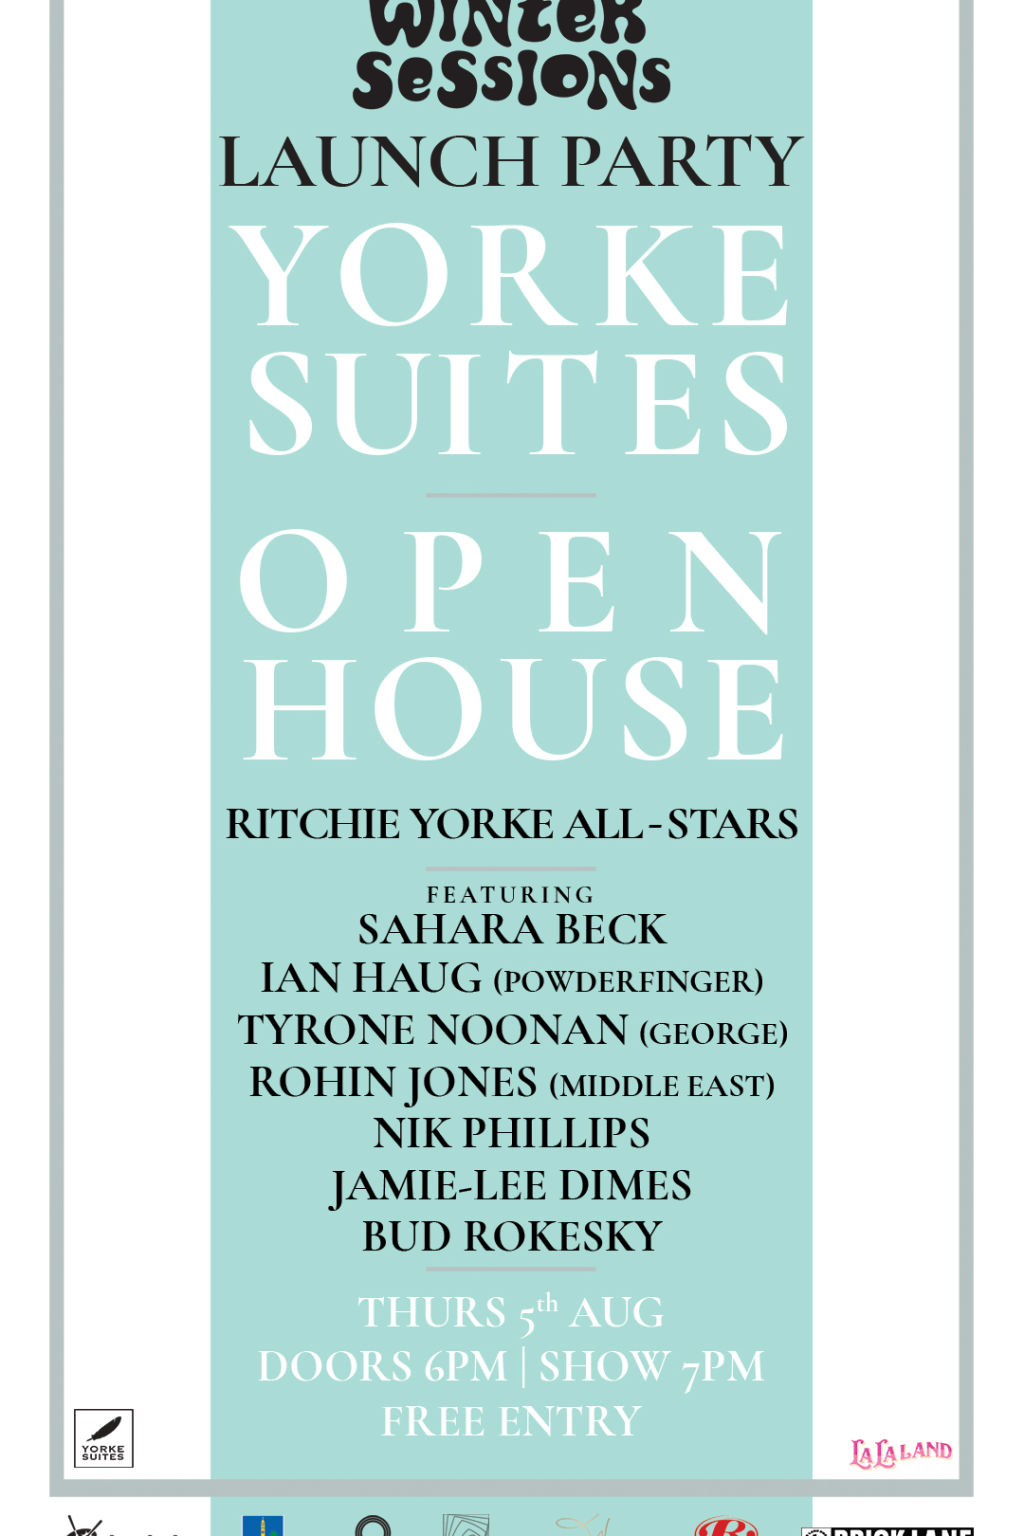 YORKE SUITES GRAND OPENING: WINTER SESSIONS LAUNCH PARTY